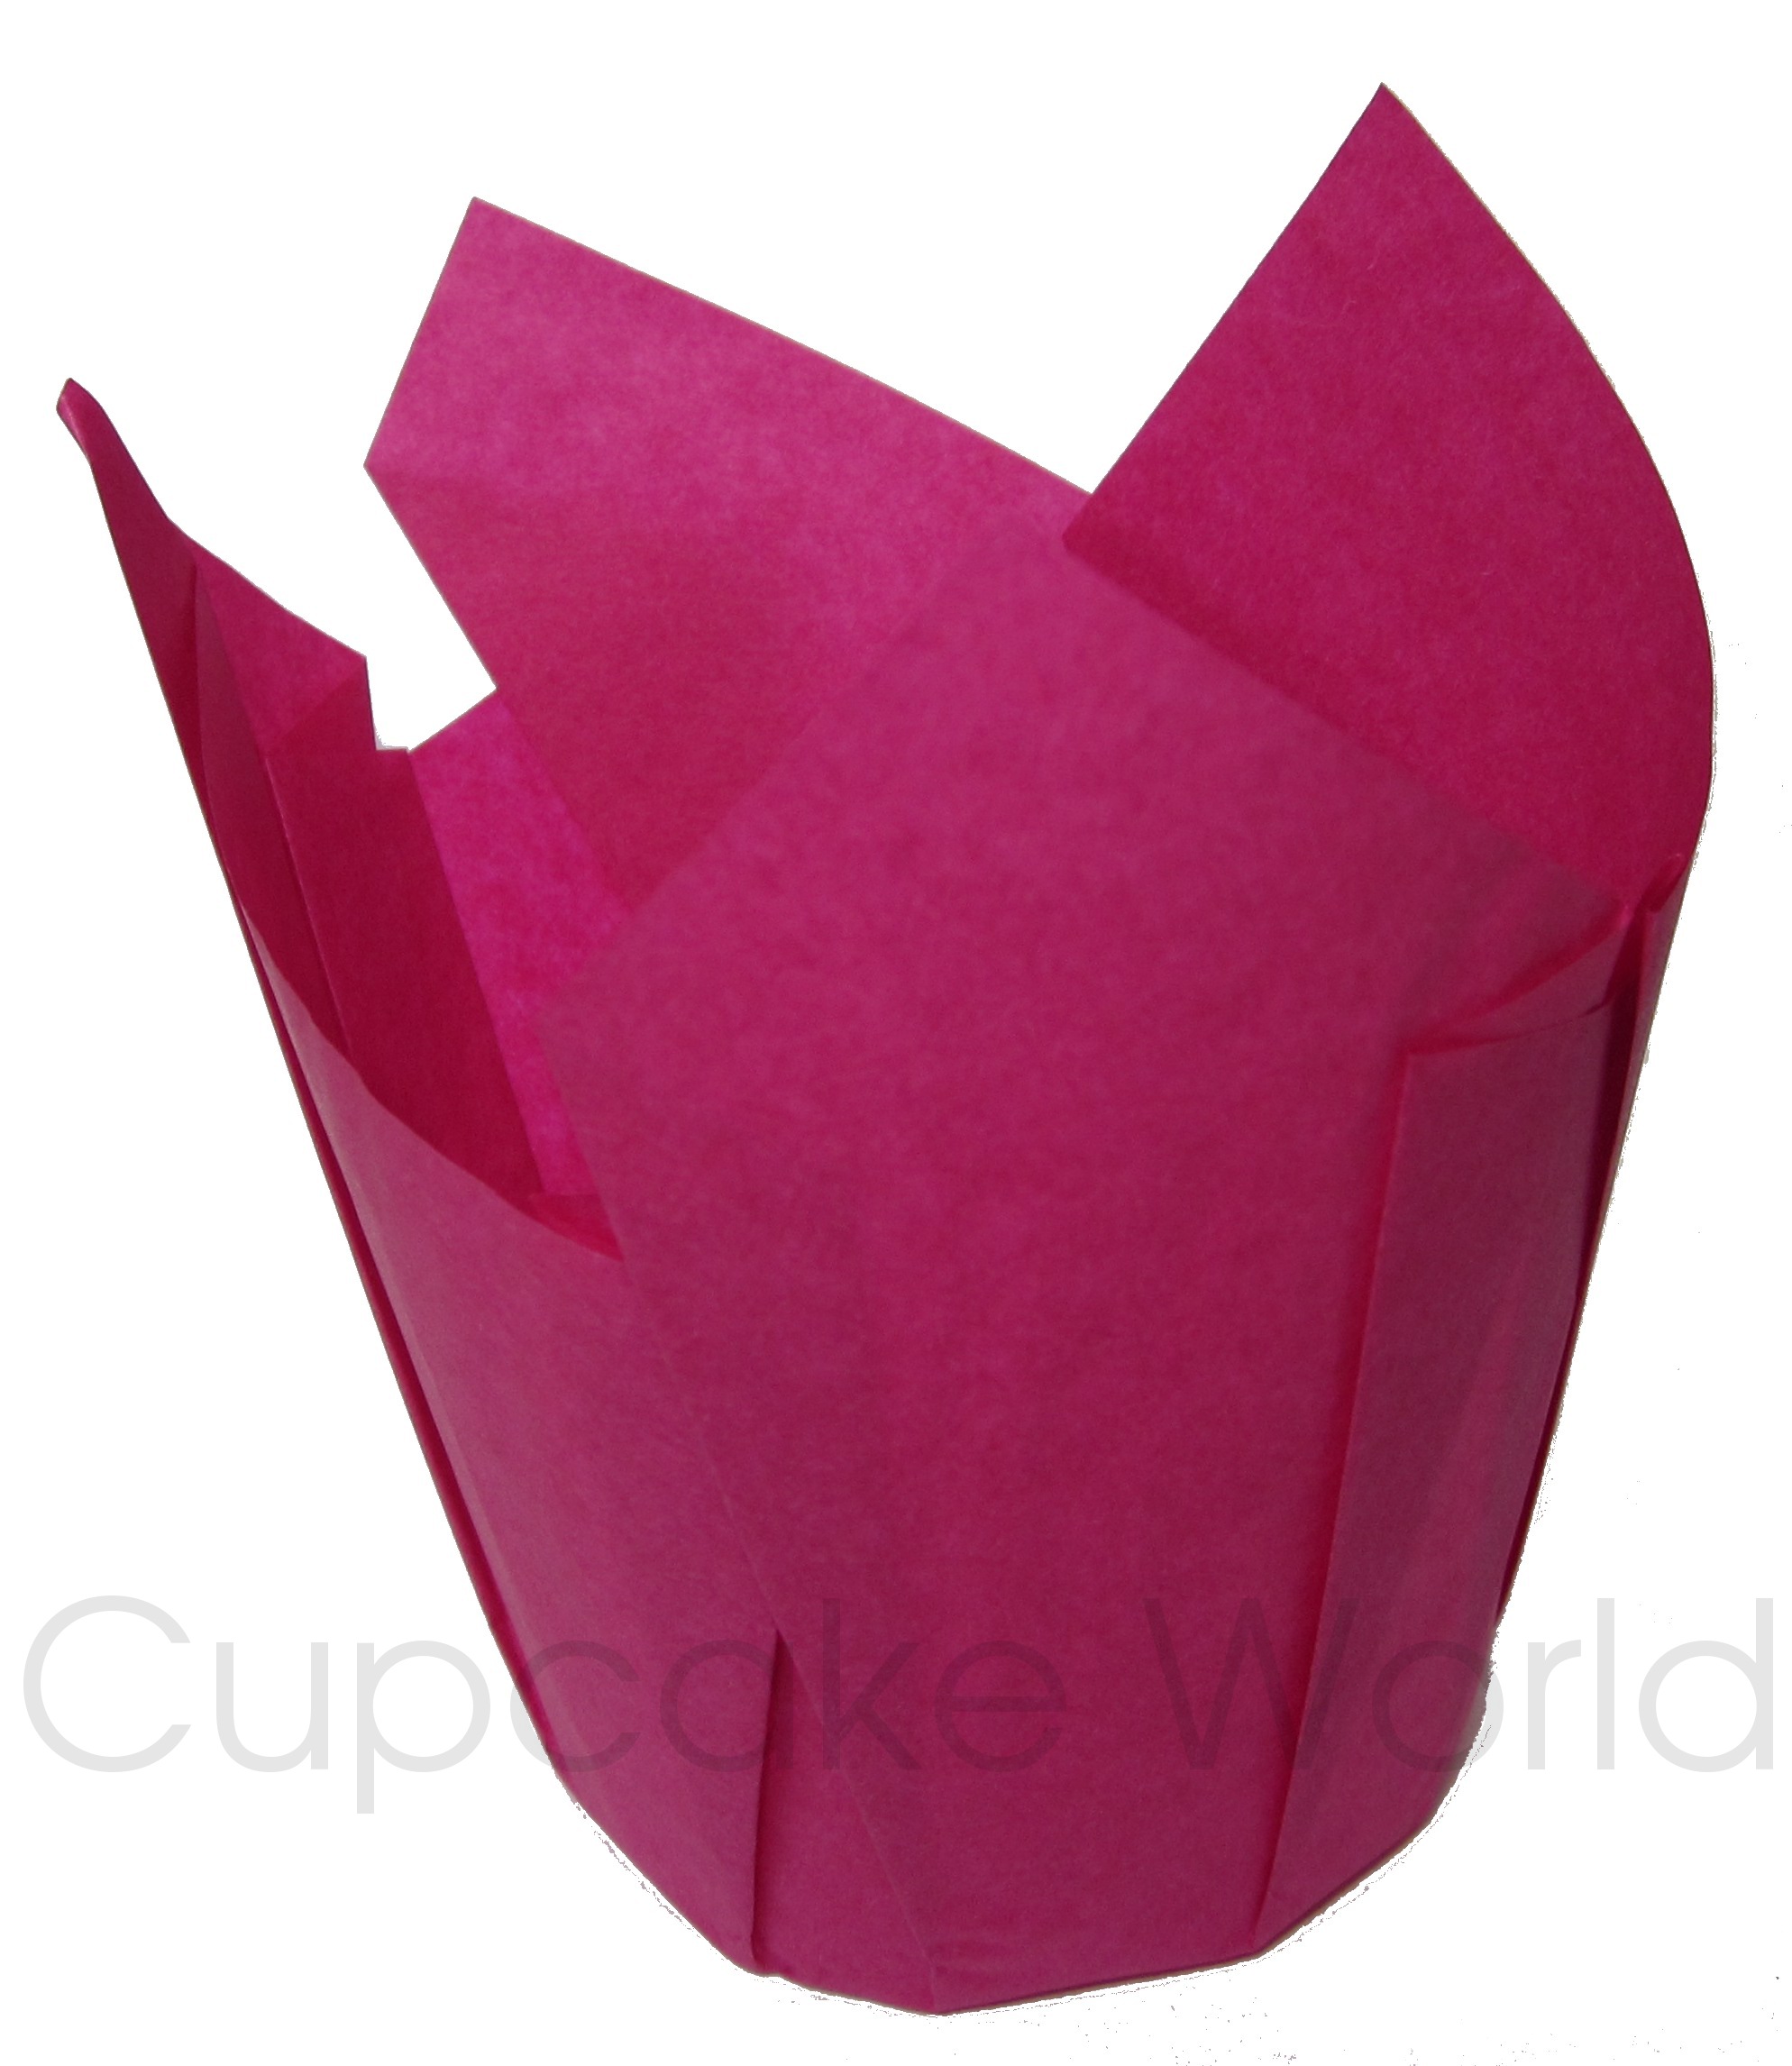 25PC CAFE STYLE HOT PINK PAPER CUPCAKE MUFFIN WRAPS STANDARD